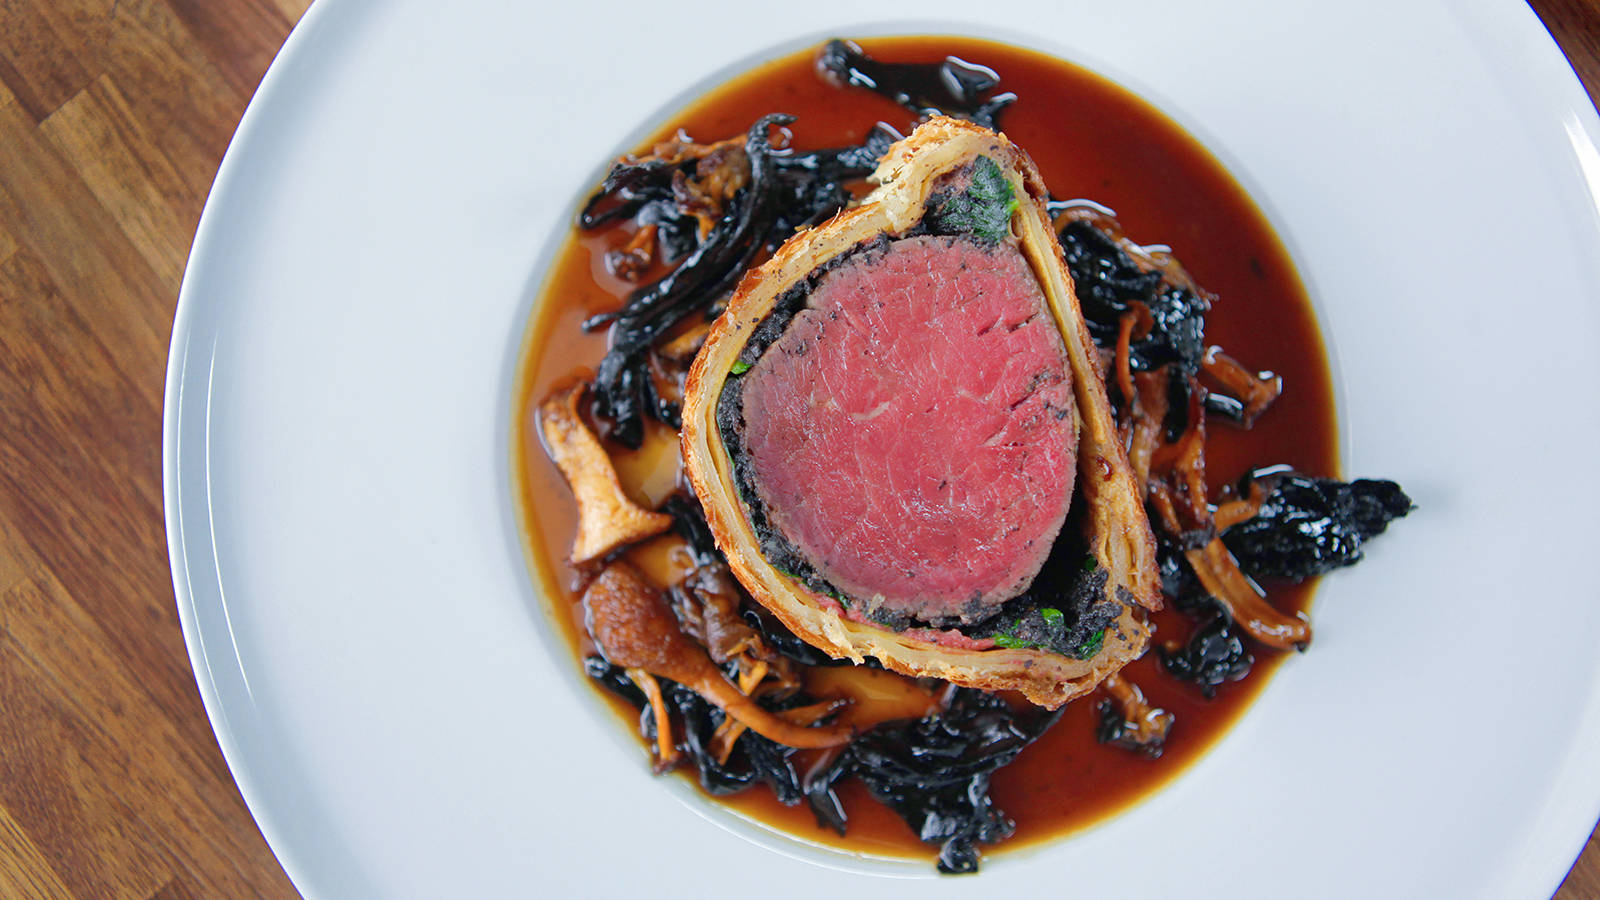 Gourmet Beef Wellington topped with Wild Mushrooms Wallpaper